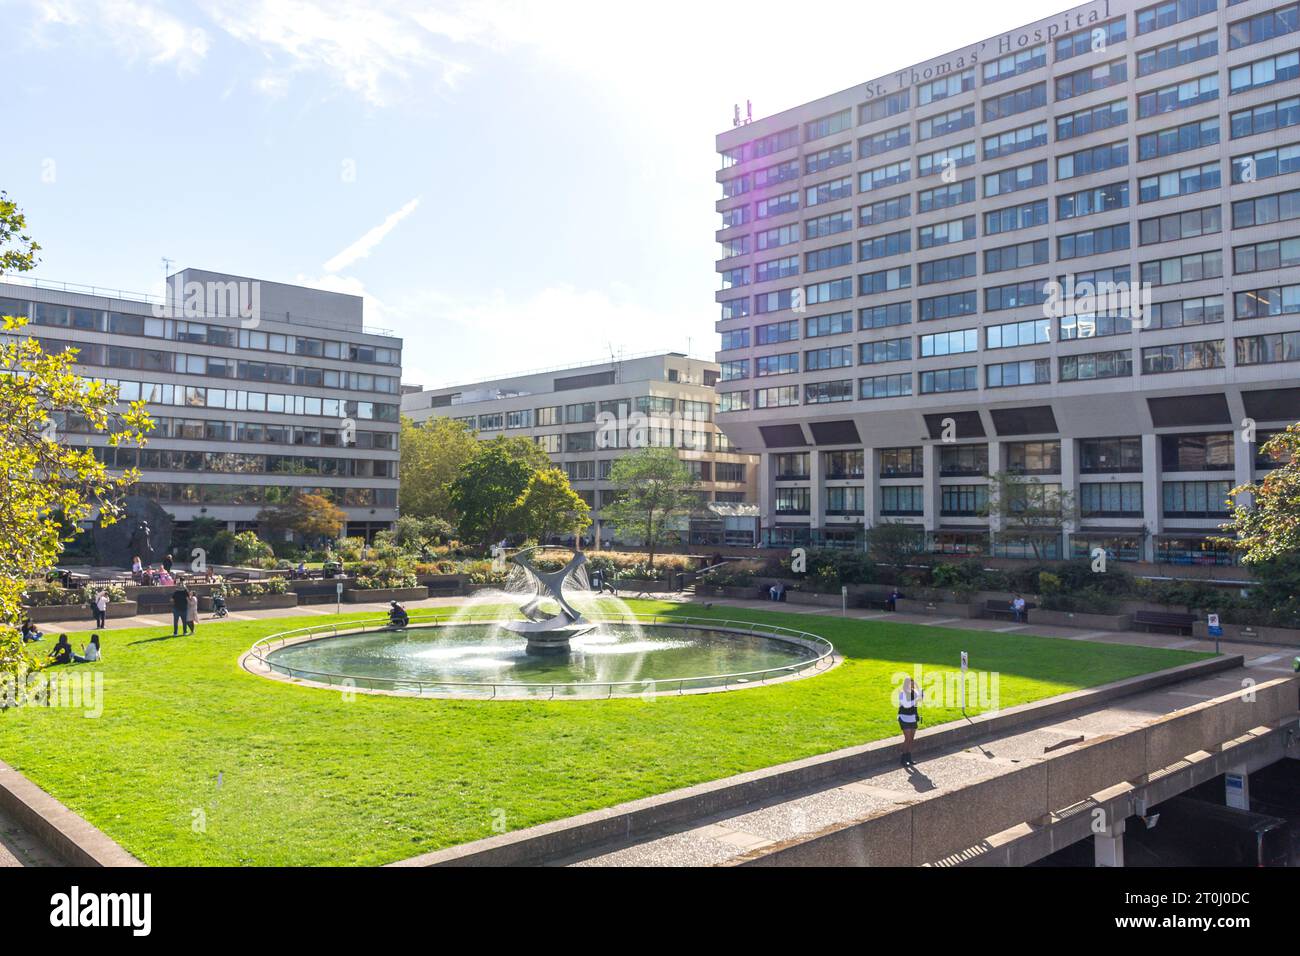 St Thomas NHS Hospital and Fountain of St Thomas Gardens South Bank, London Borough of Lambeth, Greater London, Angleterre, Royaume-Uni Banque D'Images